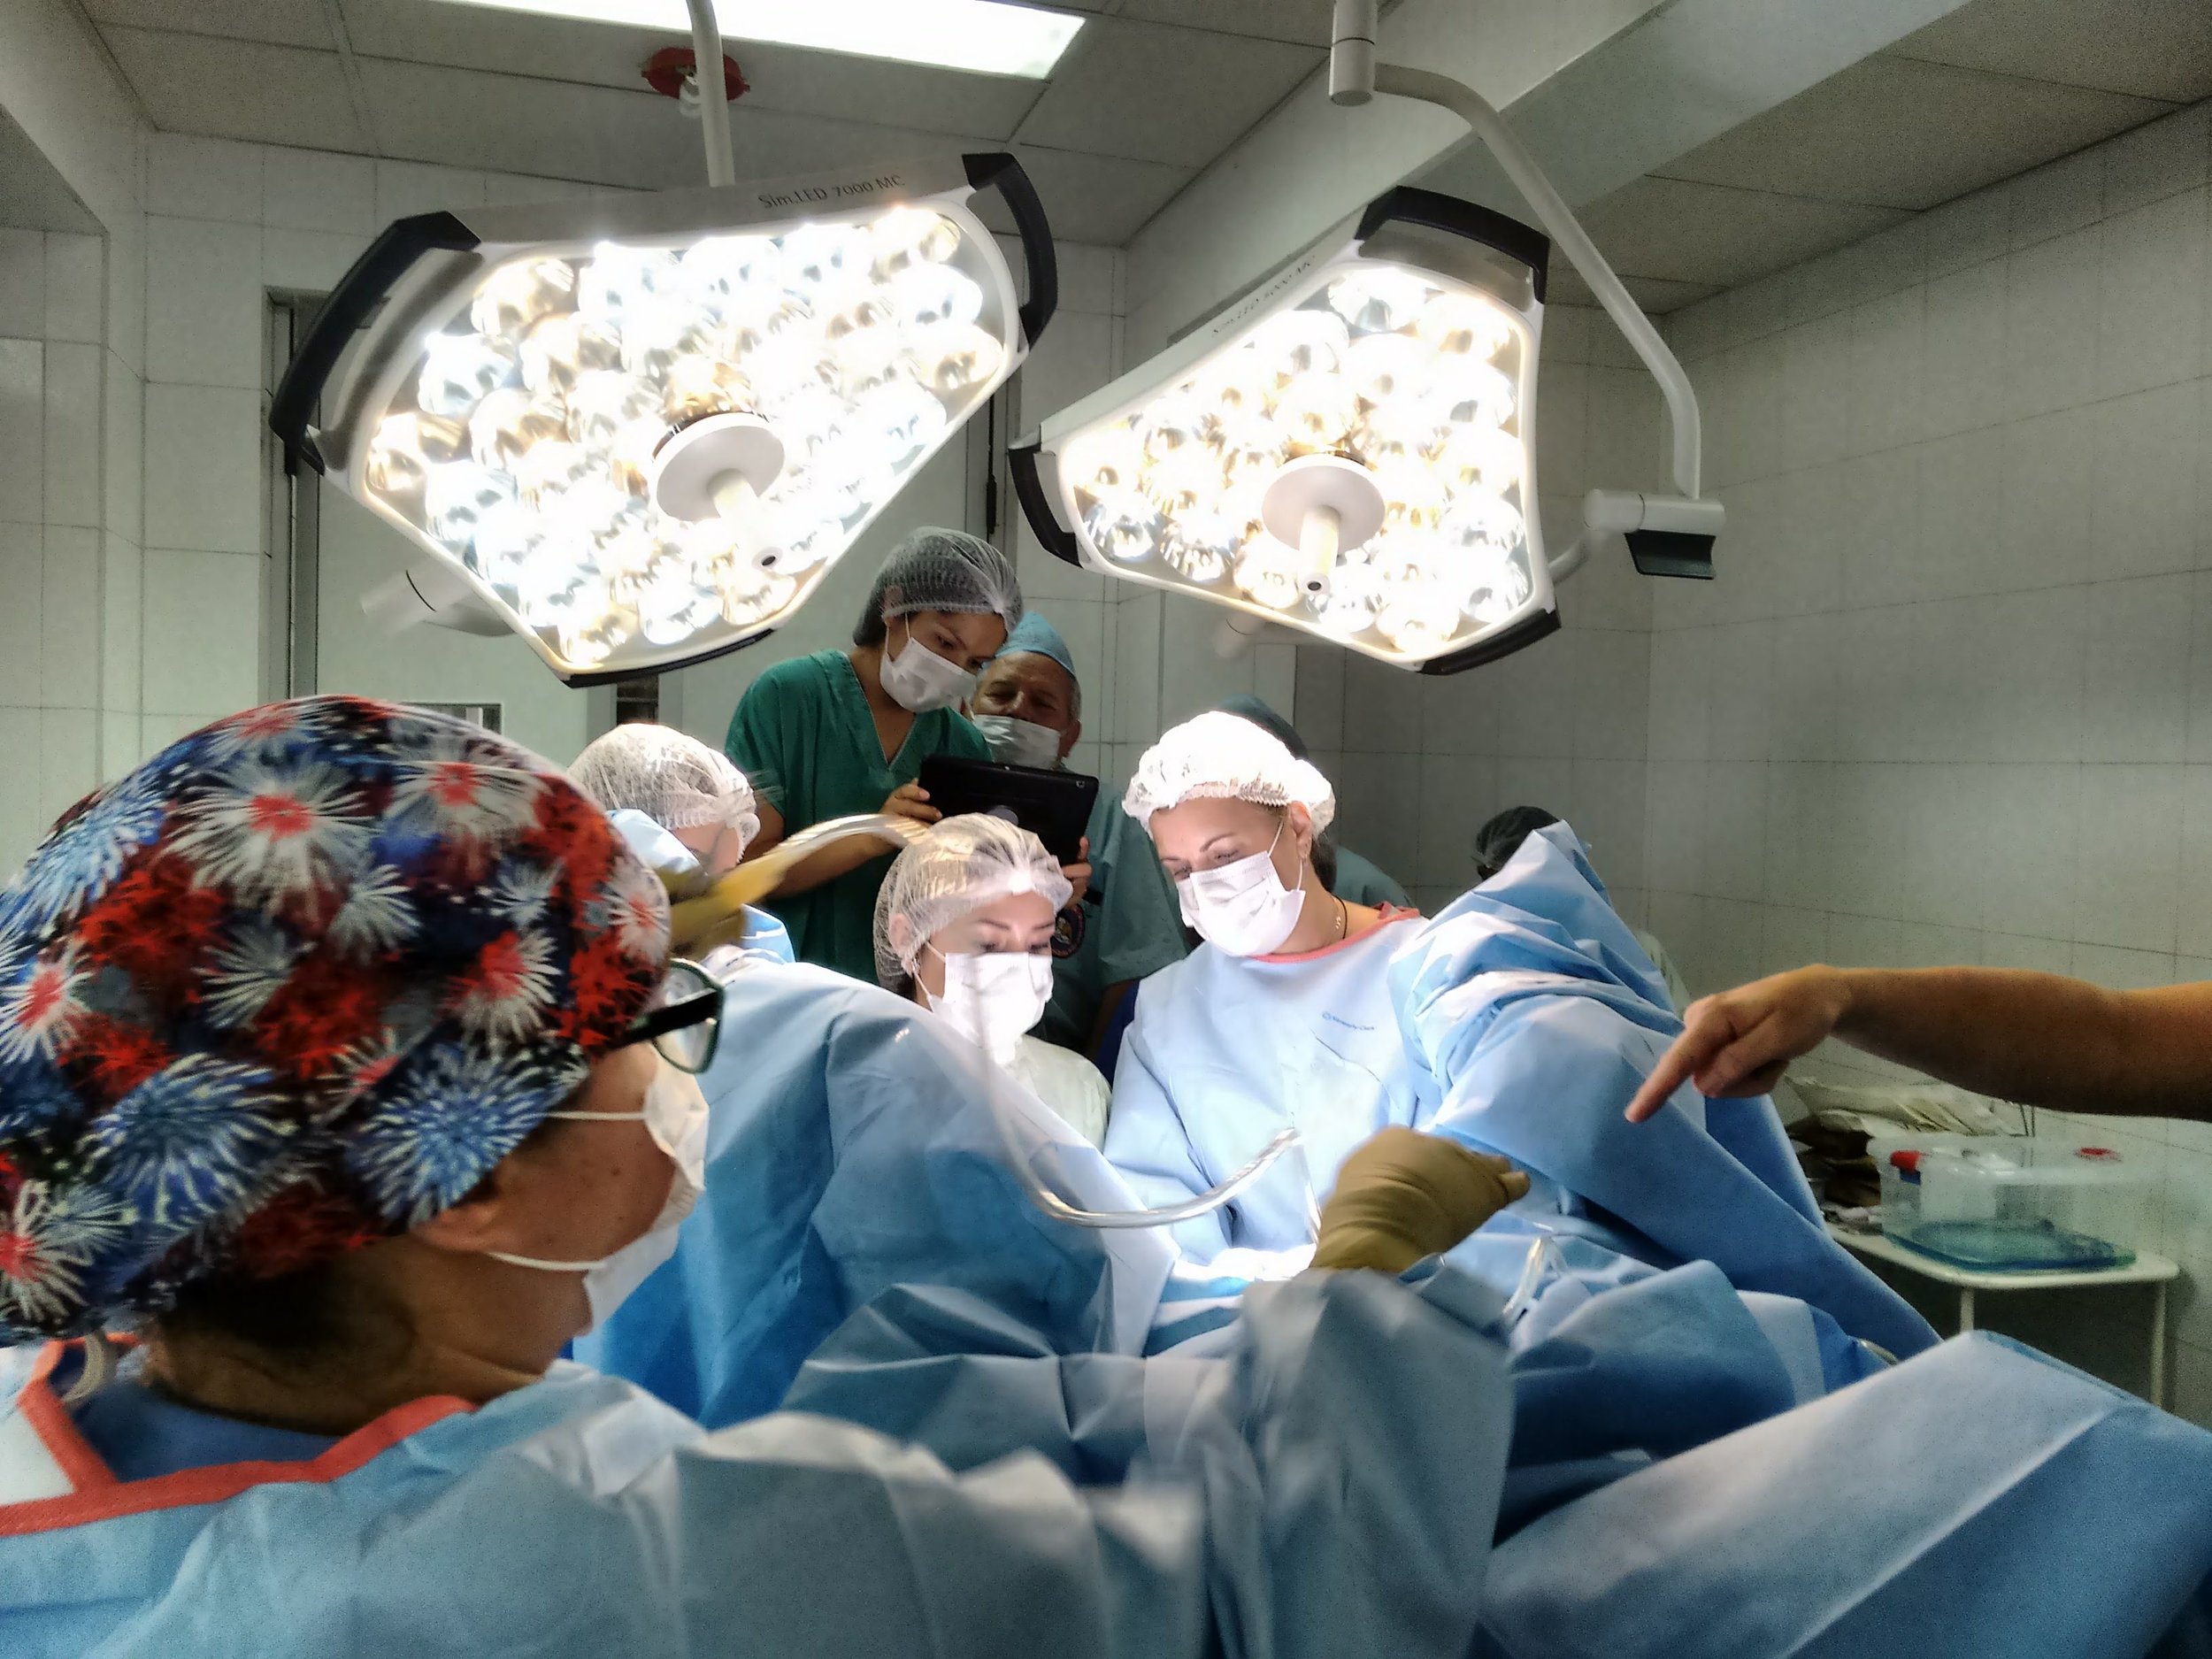  Gaby, in the foreground with red scrub cap, assists during surgery 